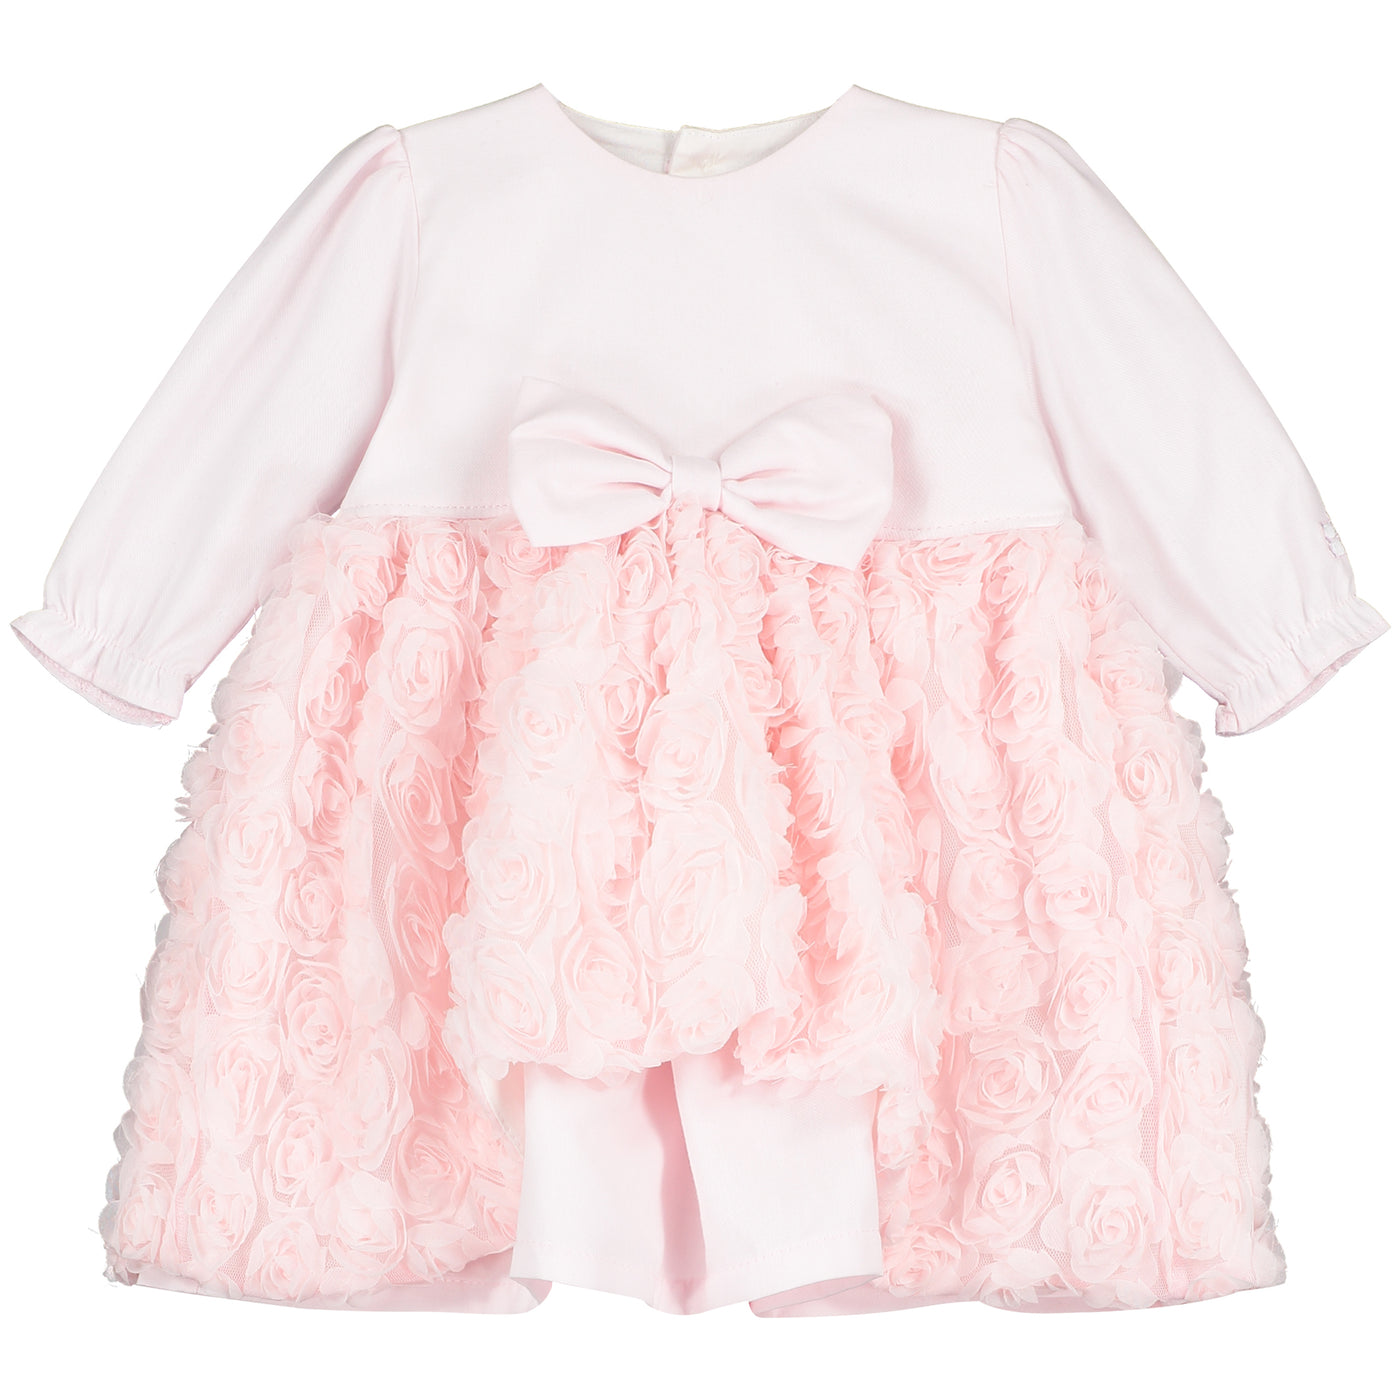 Coco Pink Baby Girls Party Dress with Tights